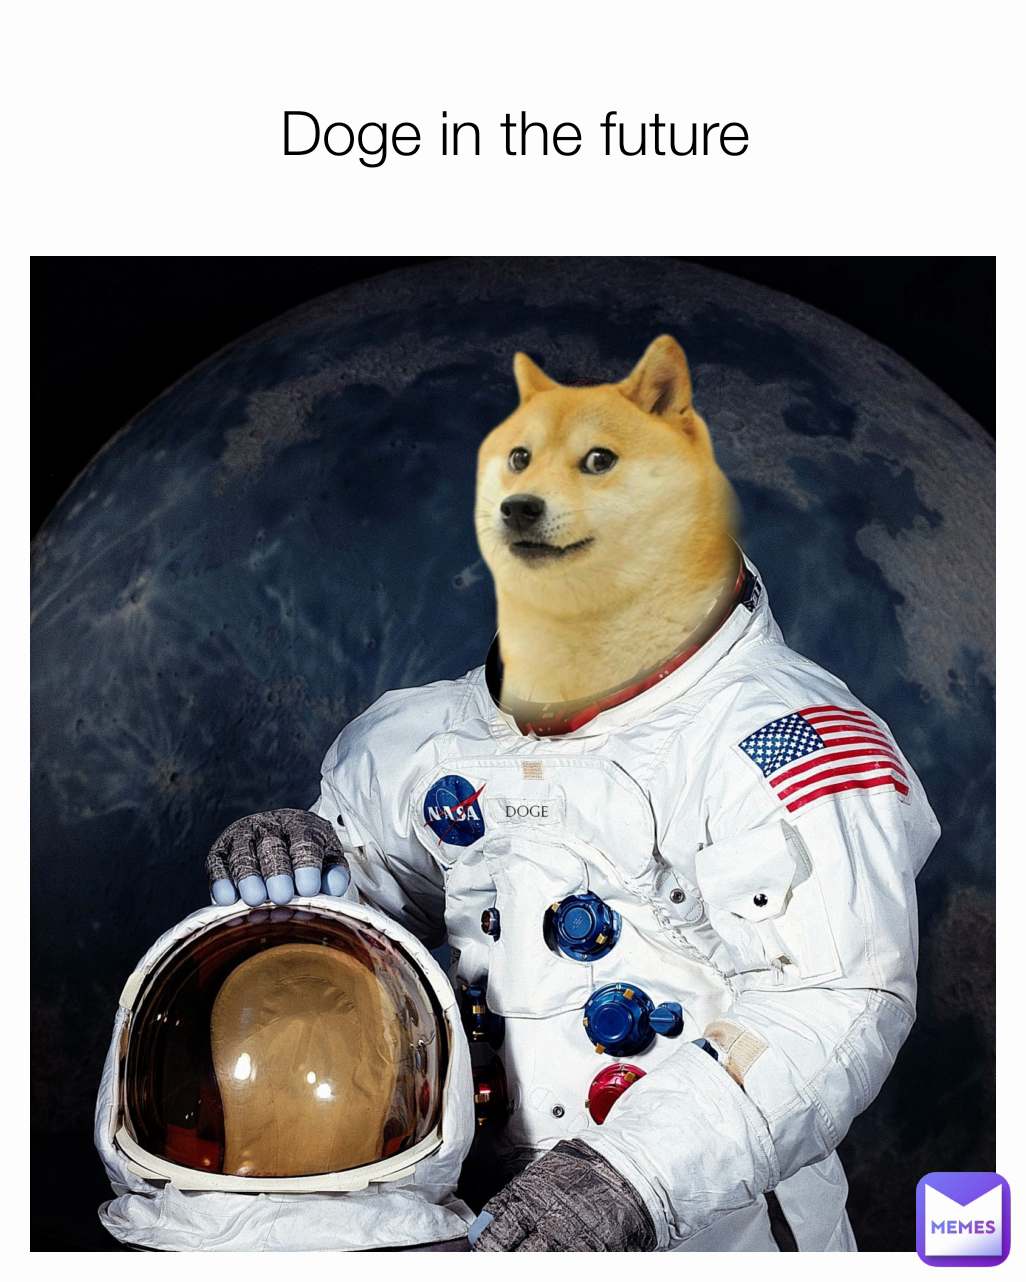 Doge in the future